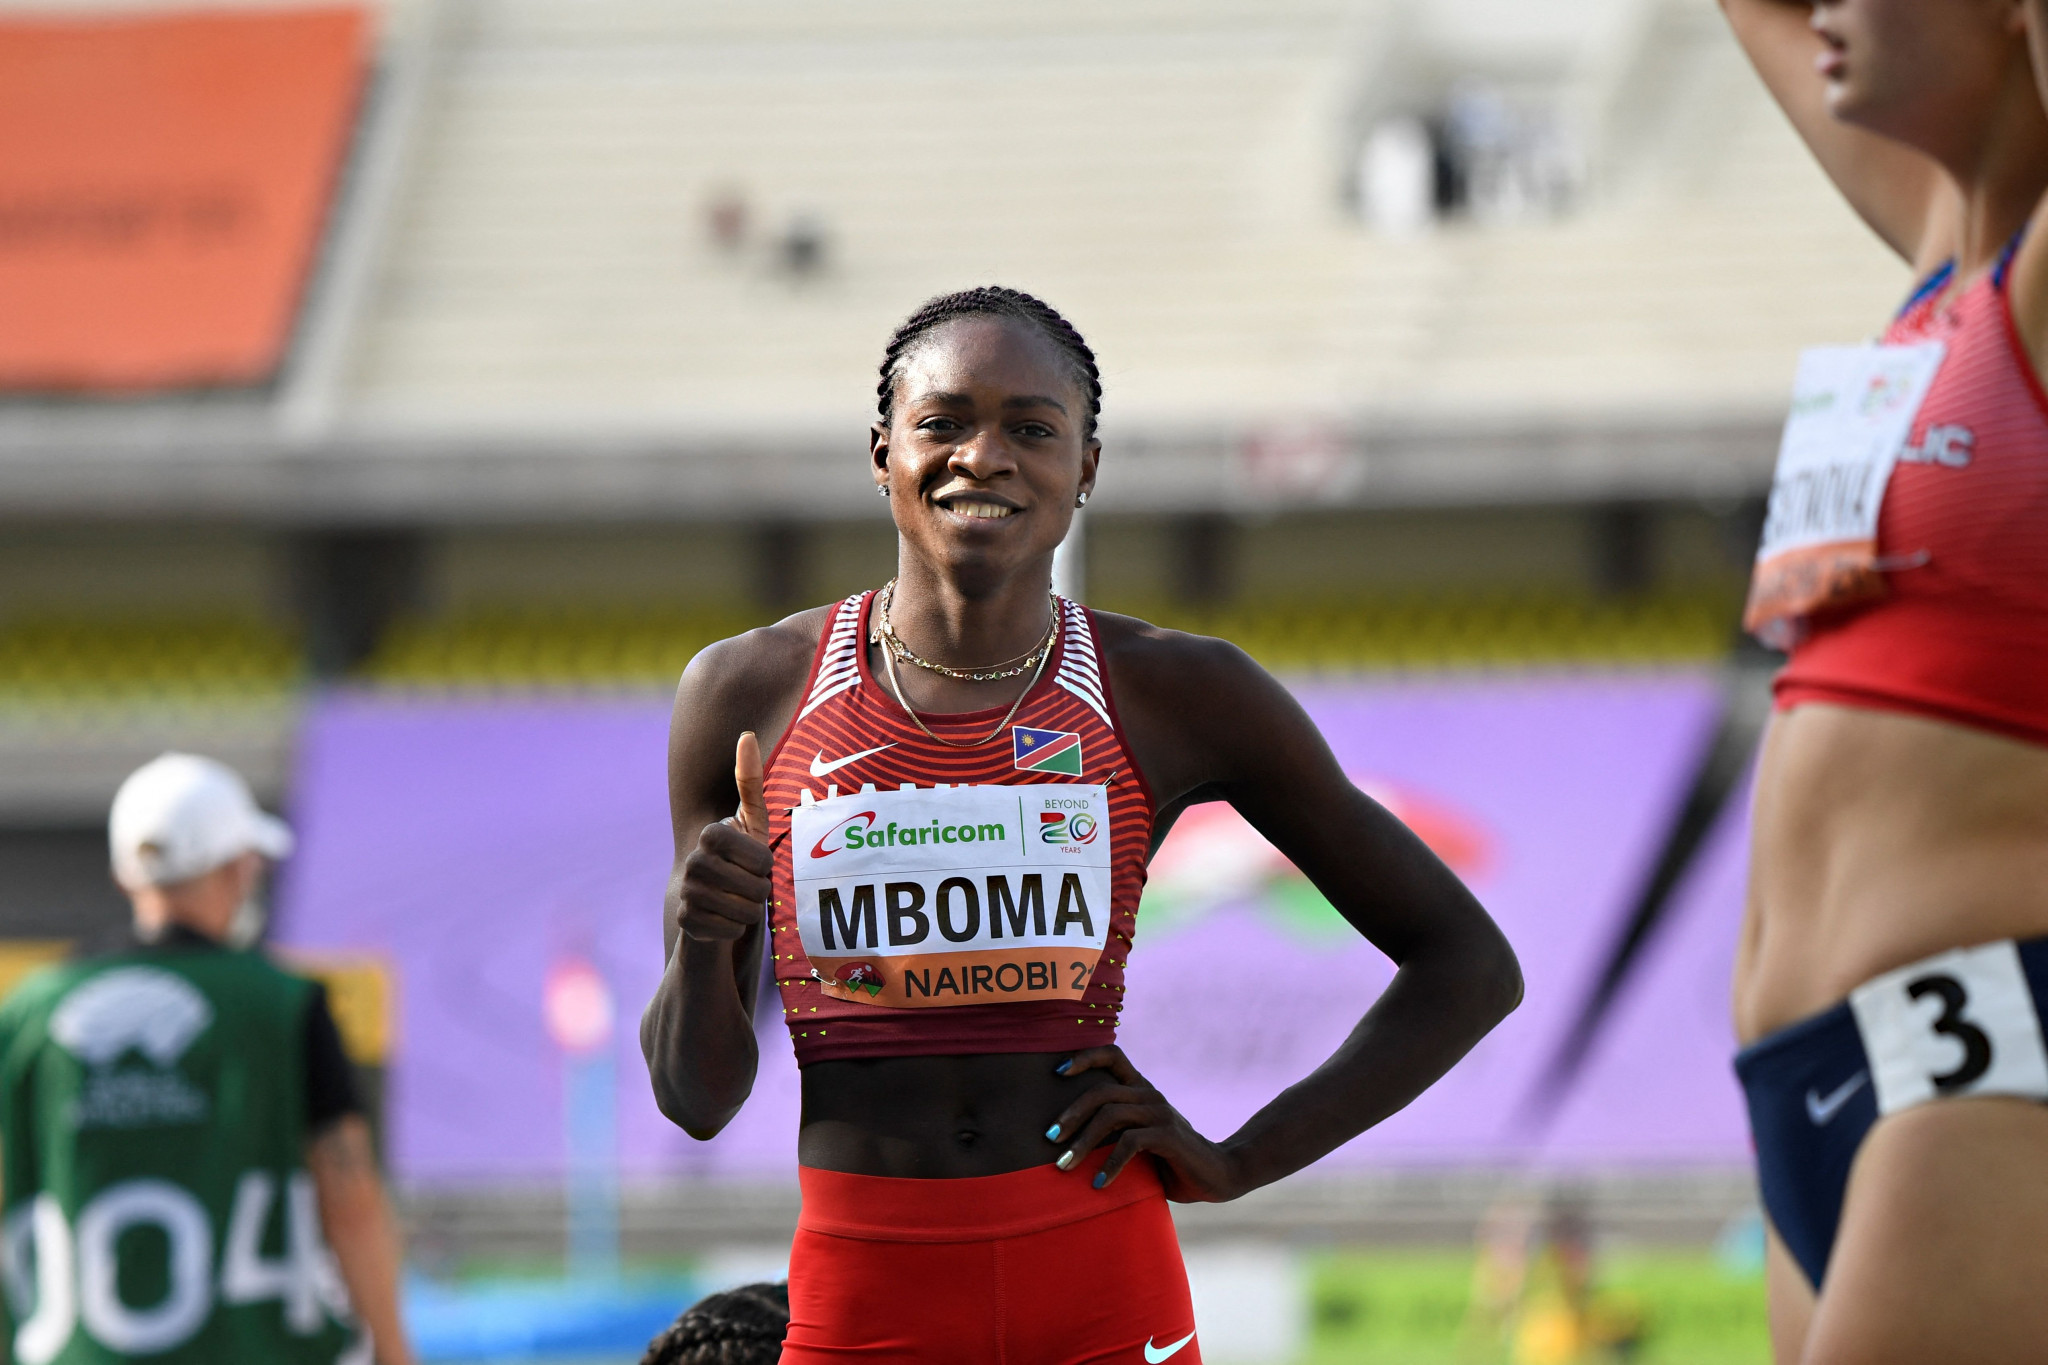 Olympic silver medallist Mboma leads Namibian 200m one-two at World Athletics Under-20 Championships